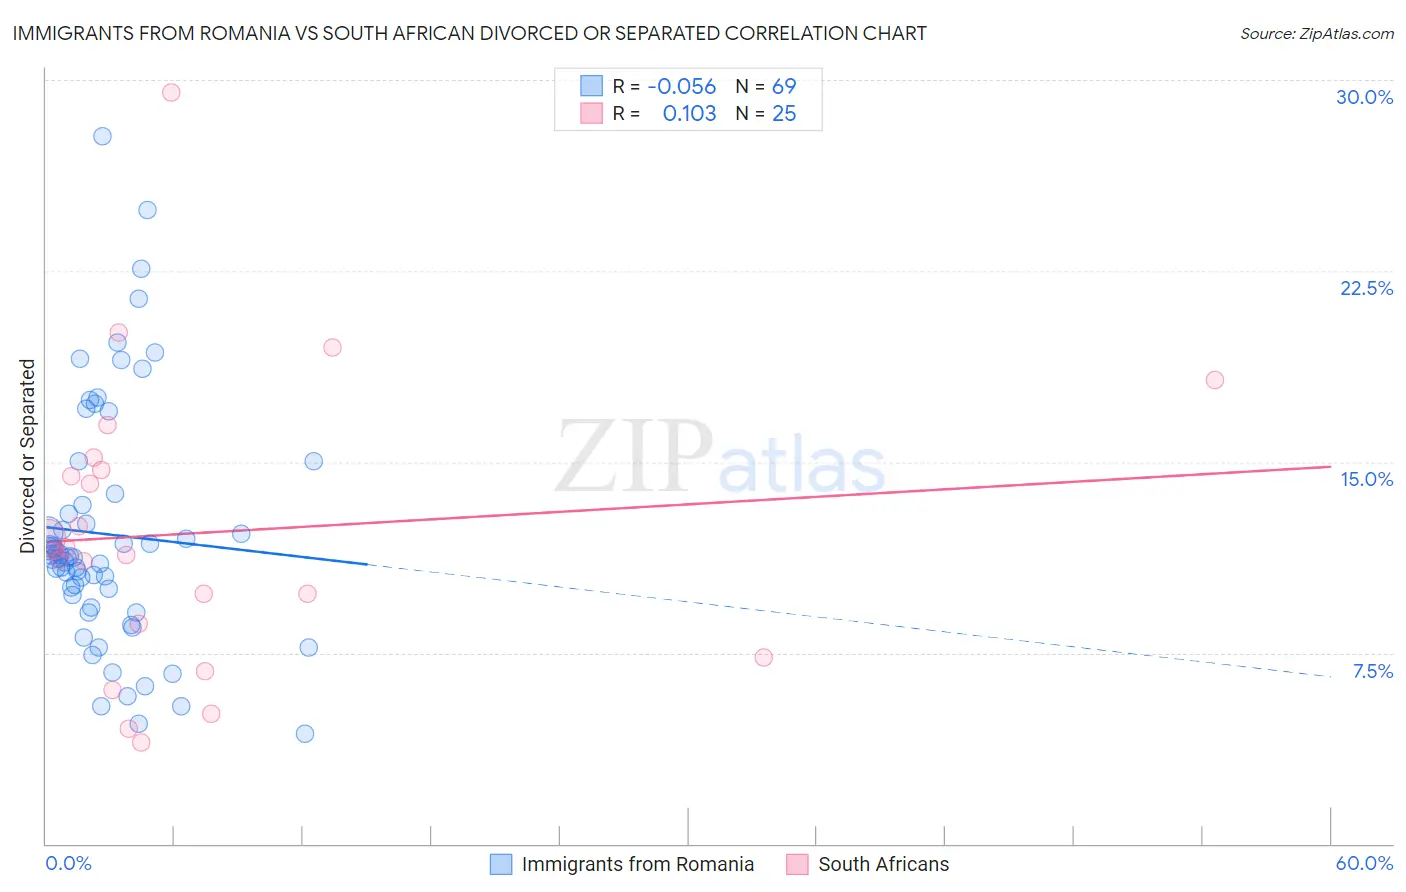 Immigrants from Romania vs South African Divorced or Separated